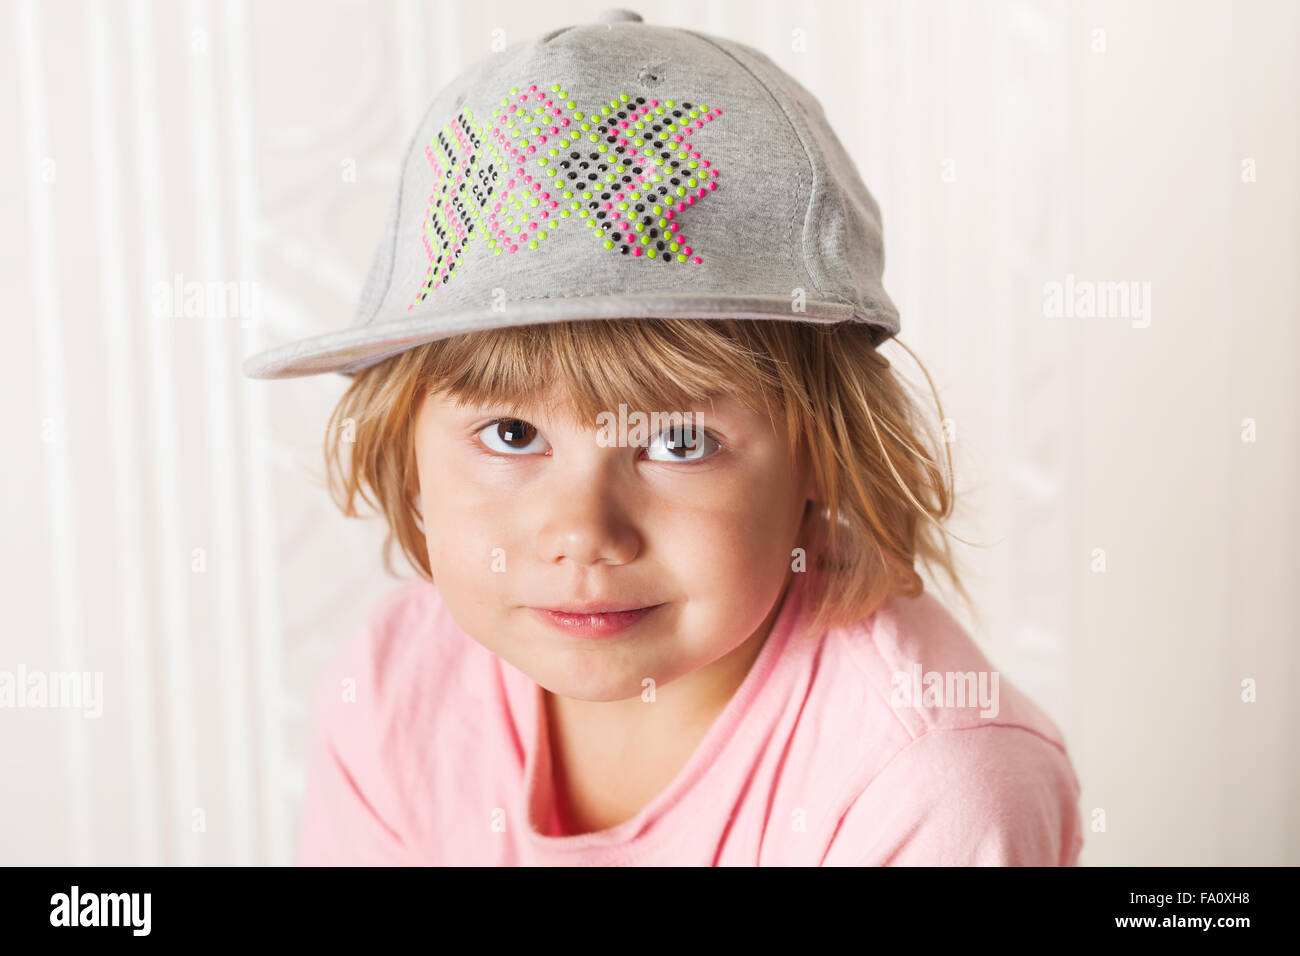 Closeup portrait of cute confused Caucasian blond baby girl in gray cap Stock Photo